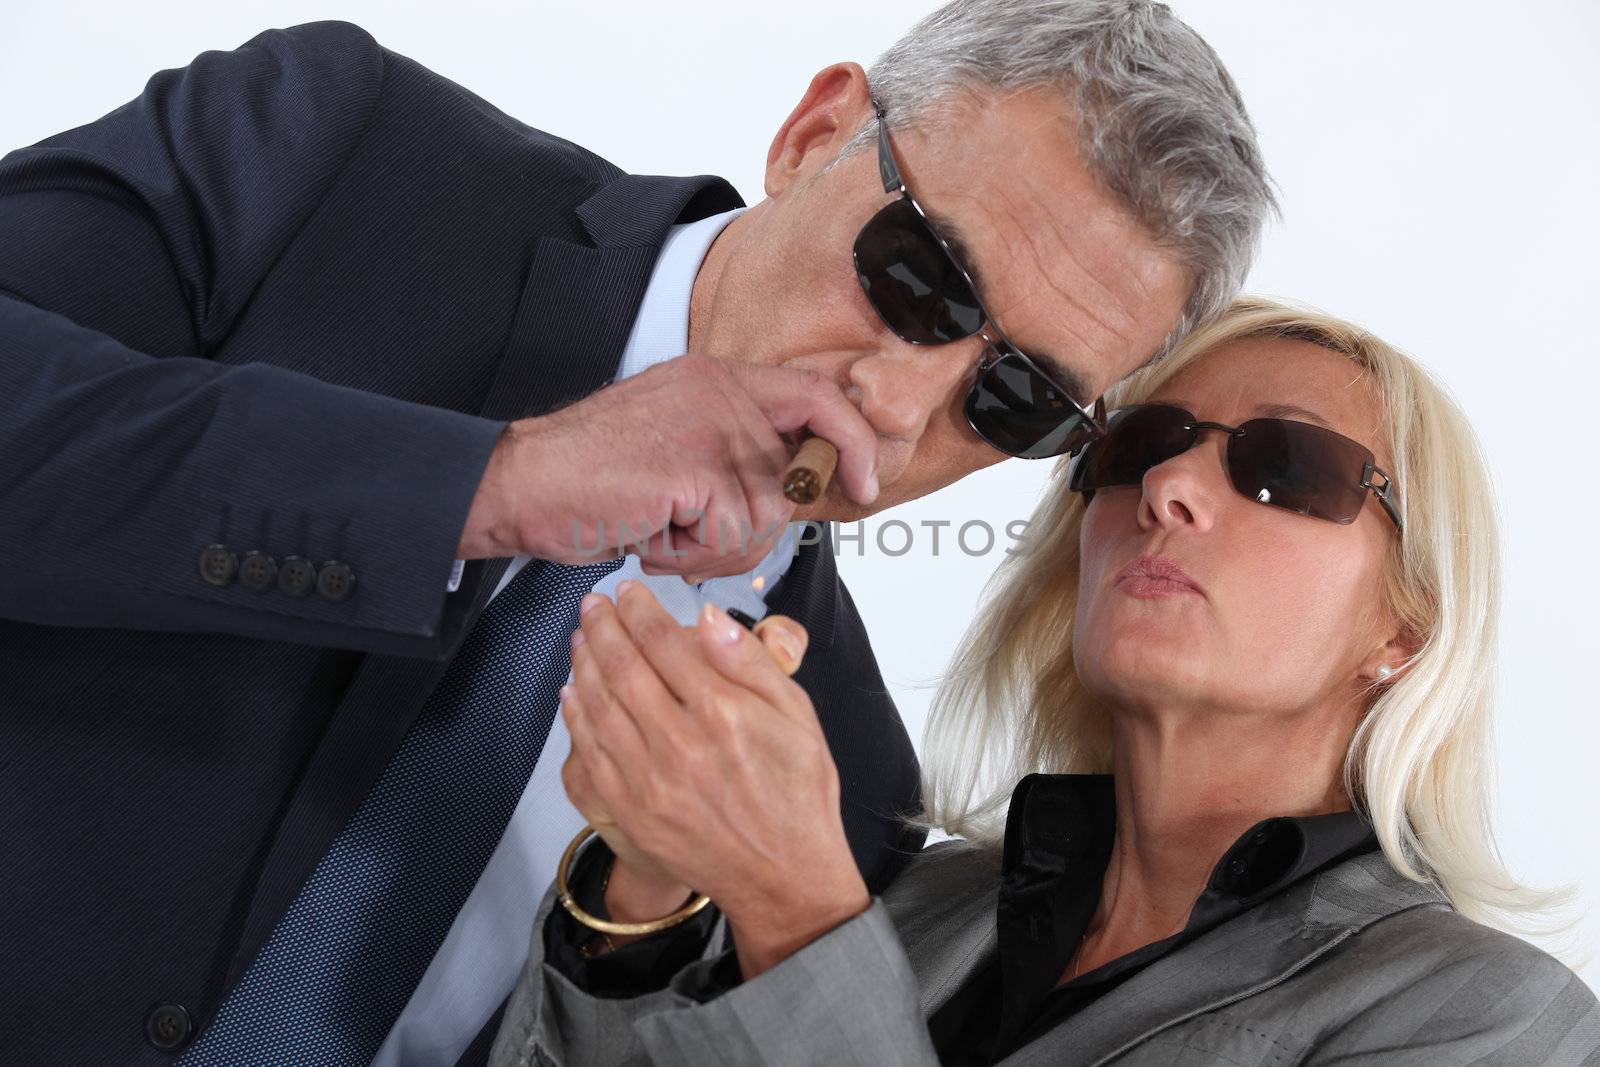 mature gentleman smoking cigar with blonde spouse showing off by phovoir